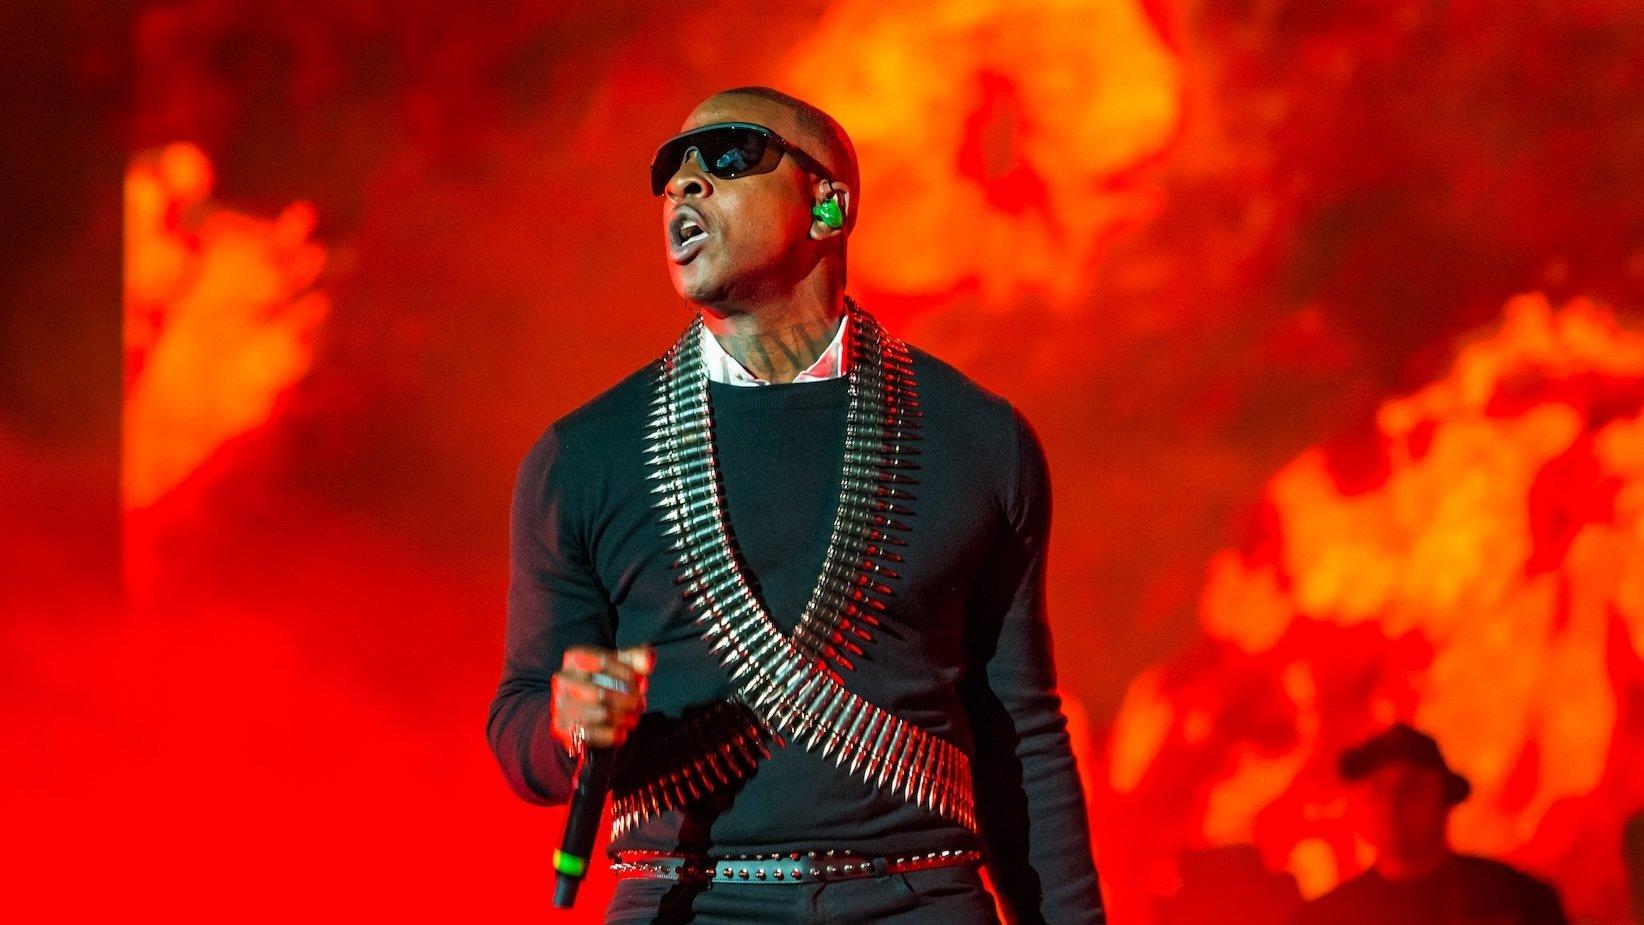 Photo of Skepta performing at Wireless Festival on September 11, 2021, in London, England. Skepta is wearing dark black sunglasses, a black shirt, and a vest made of bullets.